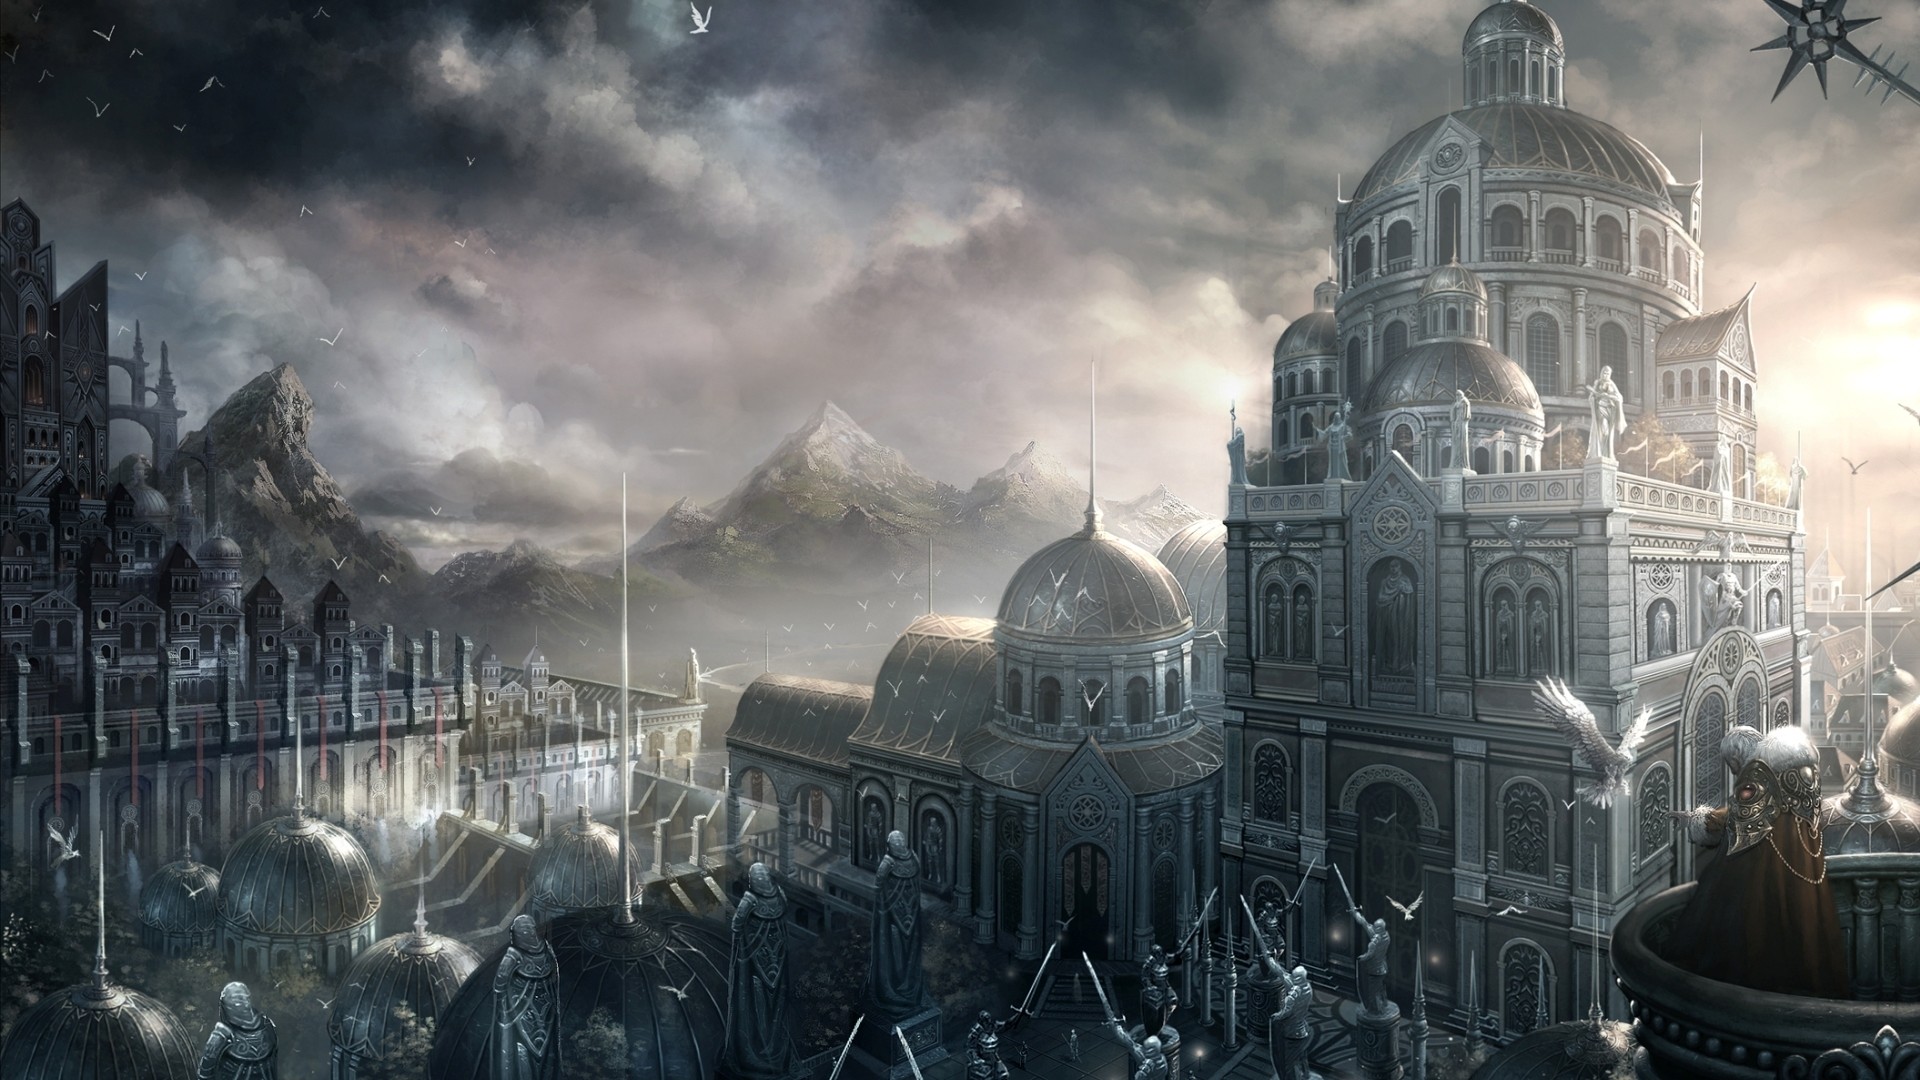 1920x1080 display,fun, fantasy, warriors, buildings, funny images, architecture, army  weapons, art, cities, yuan, xu, soldiers,chao, abstract stock images  Wallpaper ...